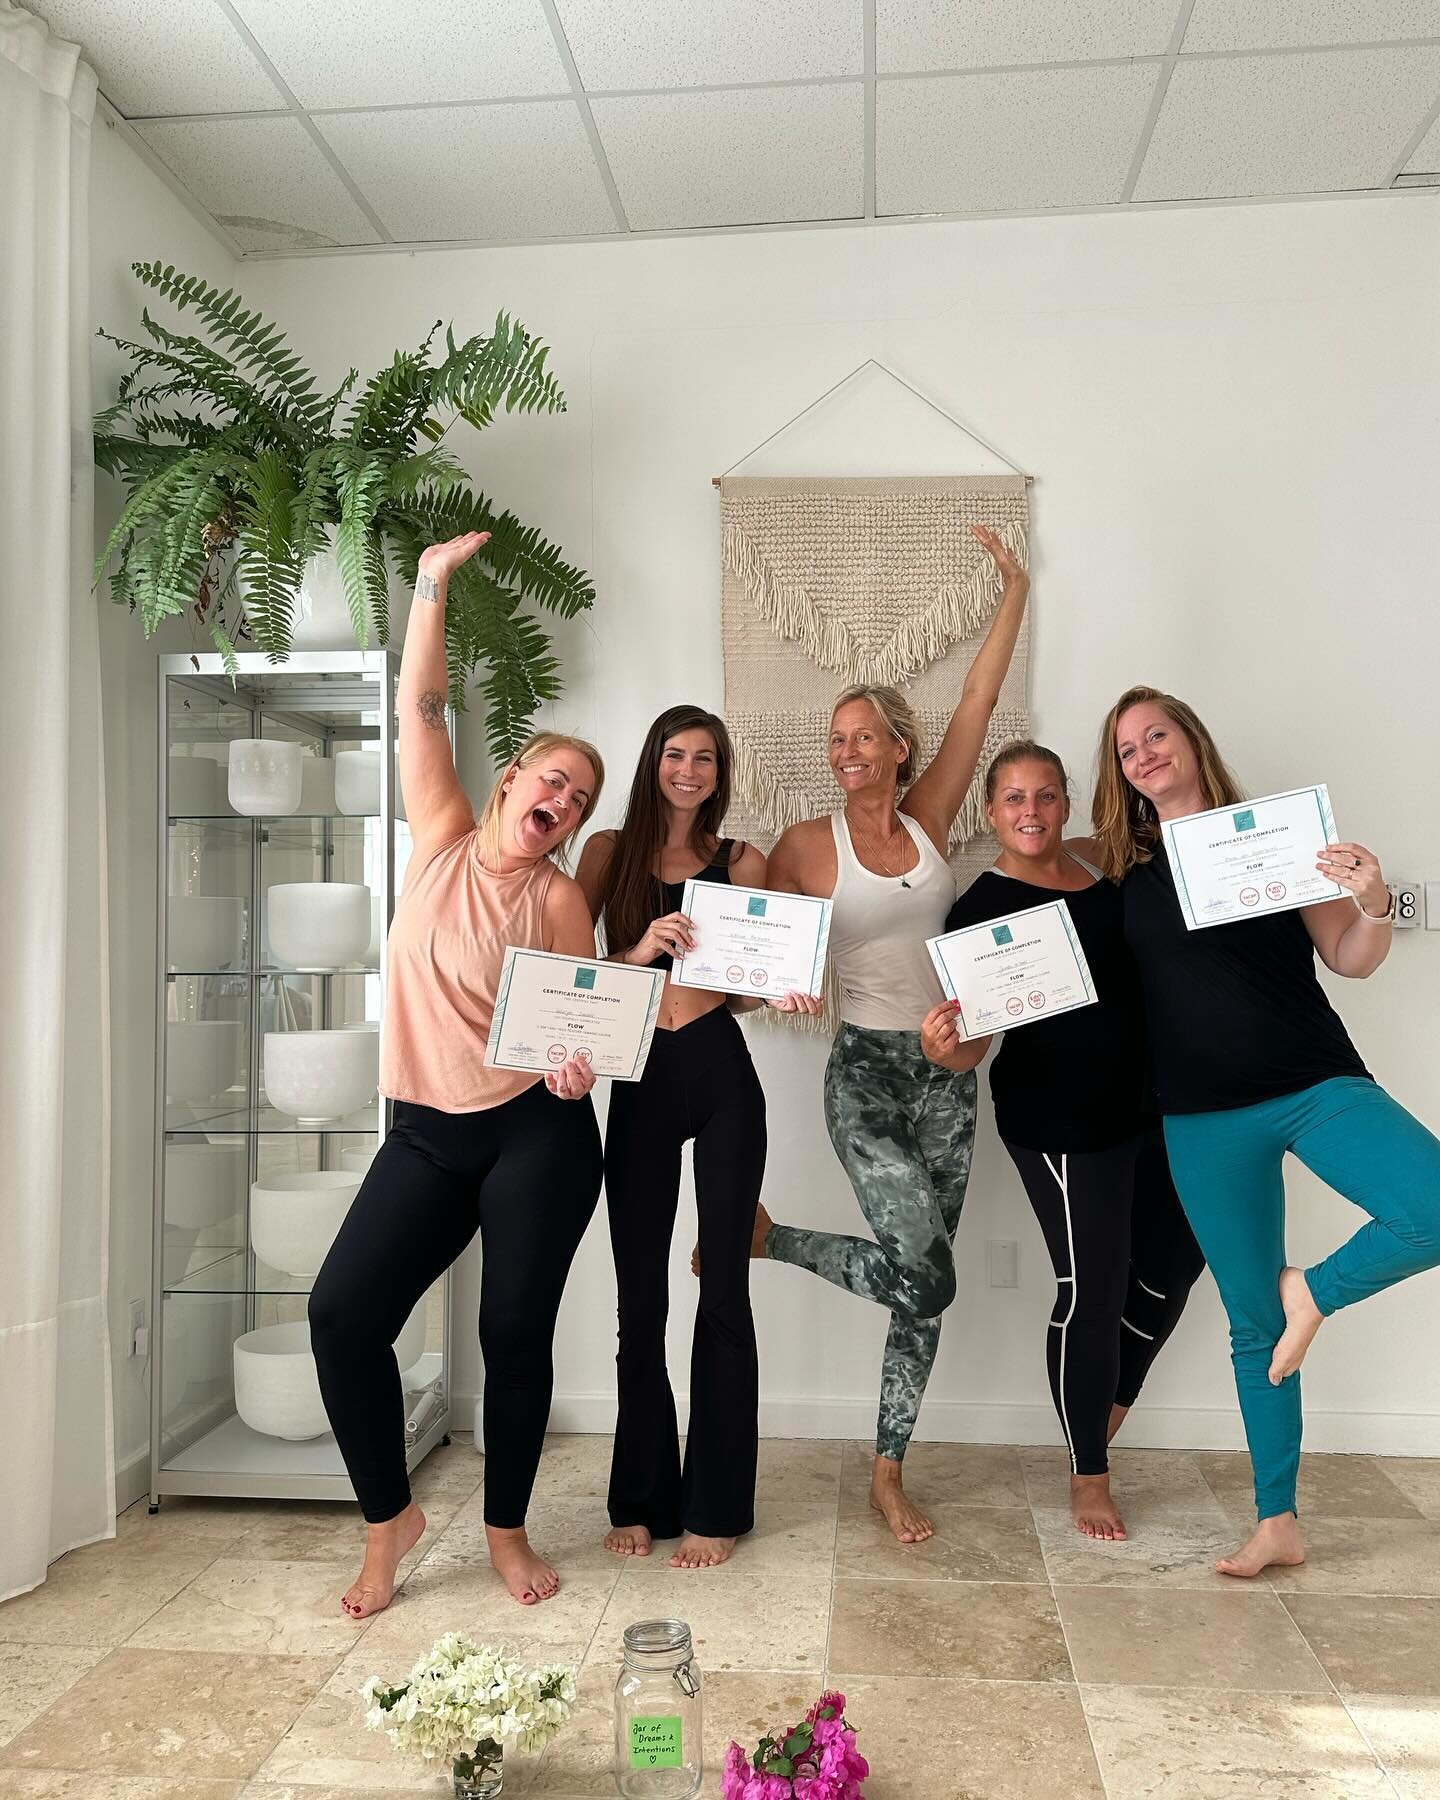 FLOW ~ Yang Yoga Teacher Training course on Cura&ccedil;ao.
A little impression of part 2. 

🧘🏻&zwj;♀️ a very small &amp; intimate group of lovely ladies
🏠 a beautiful &amp; comfortable studio
🔥 daily strengthening Vinyasa Flow Yoga sessions
🩻 l